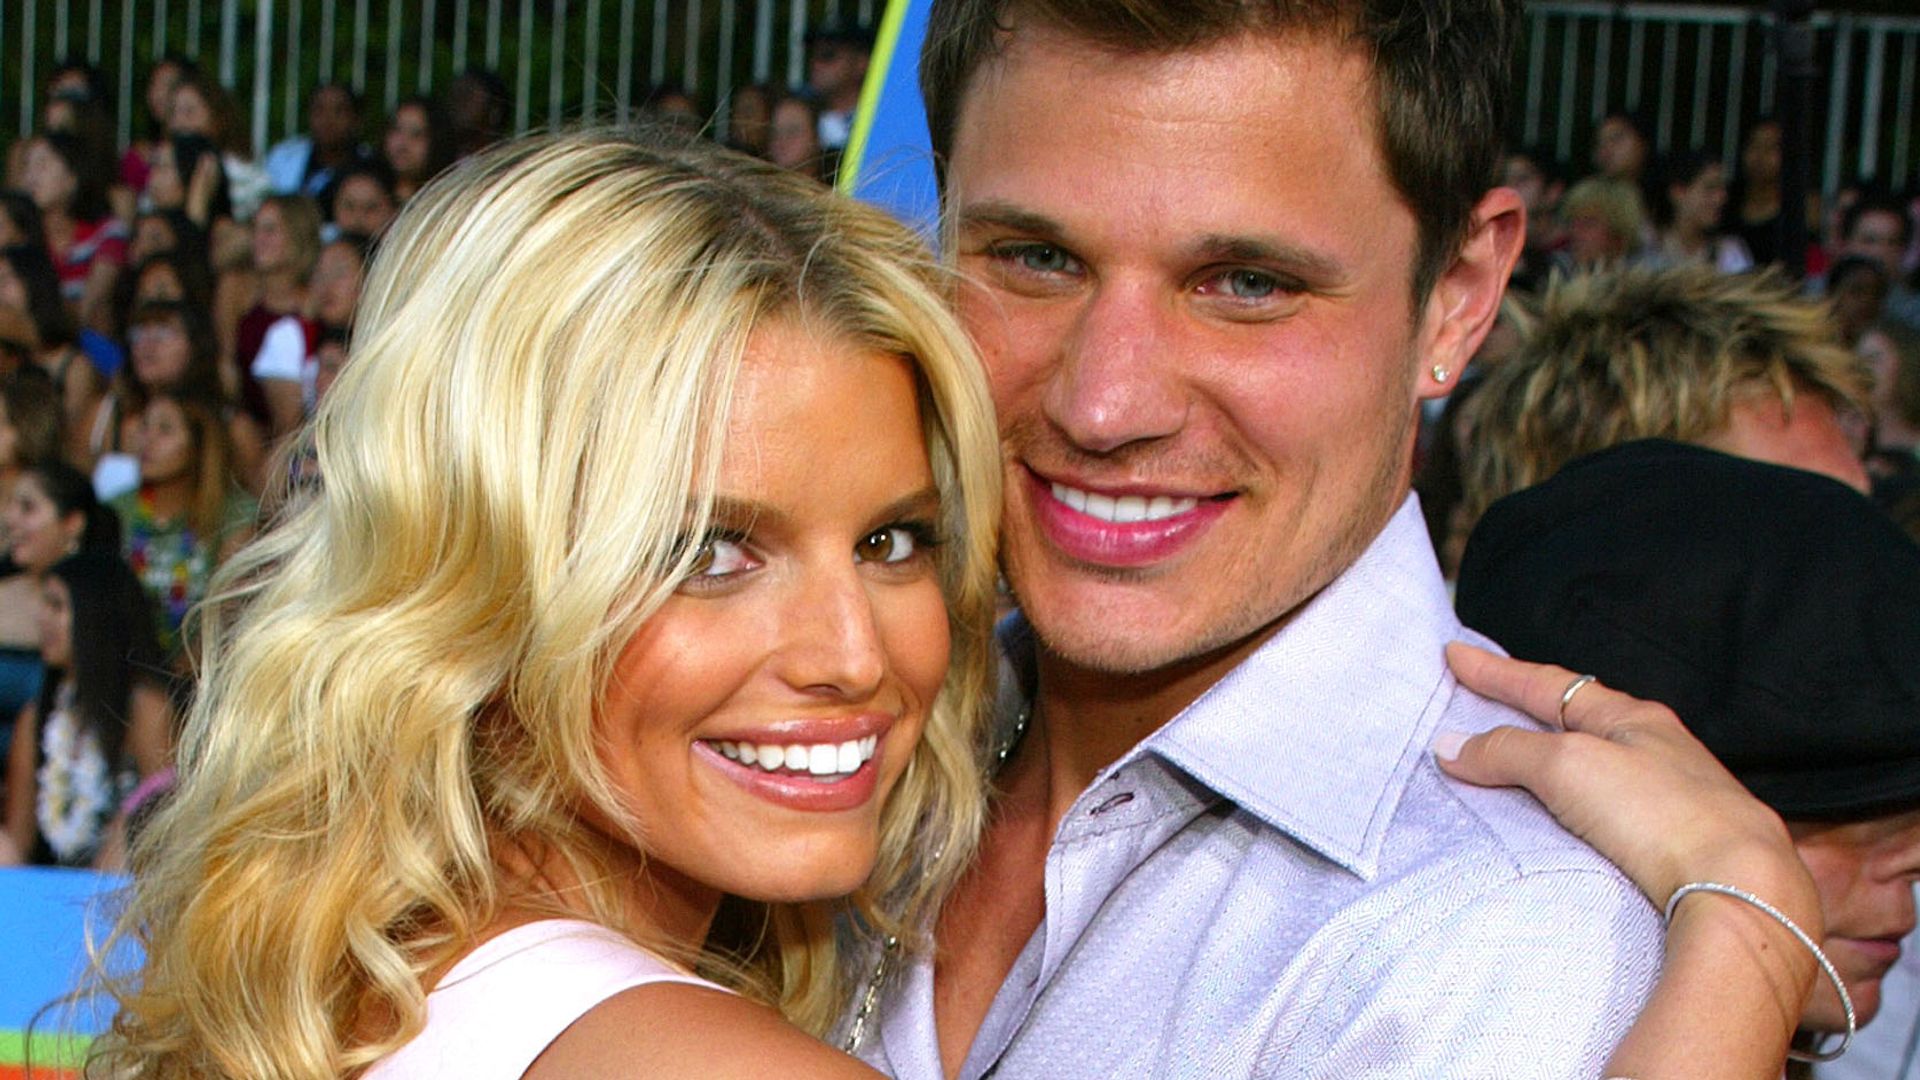 Jessica Simpson and Nick Lachey hug while smiling at the camera